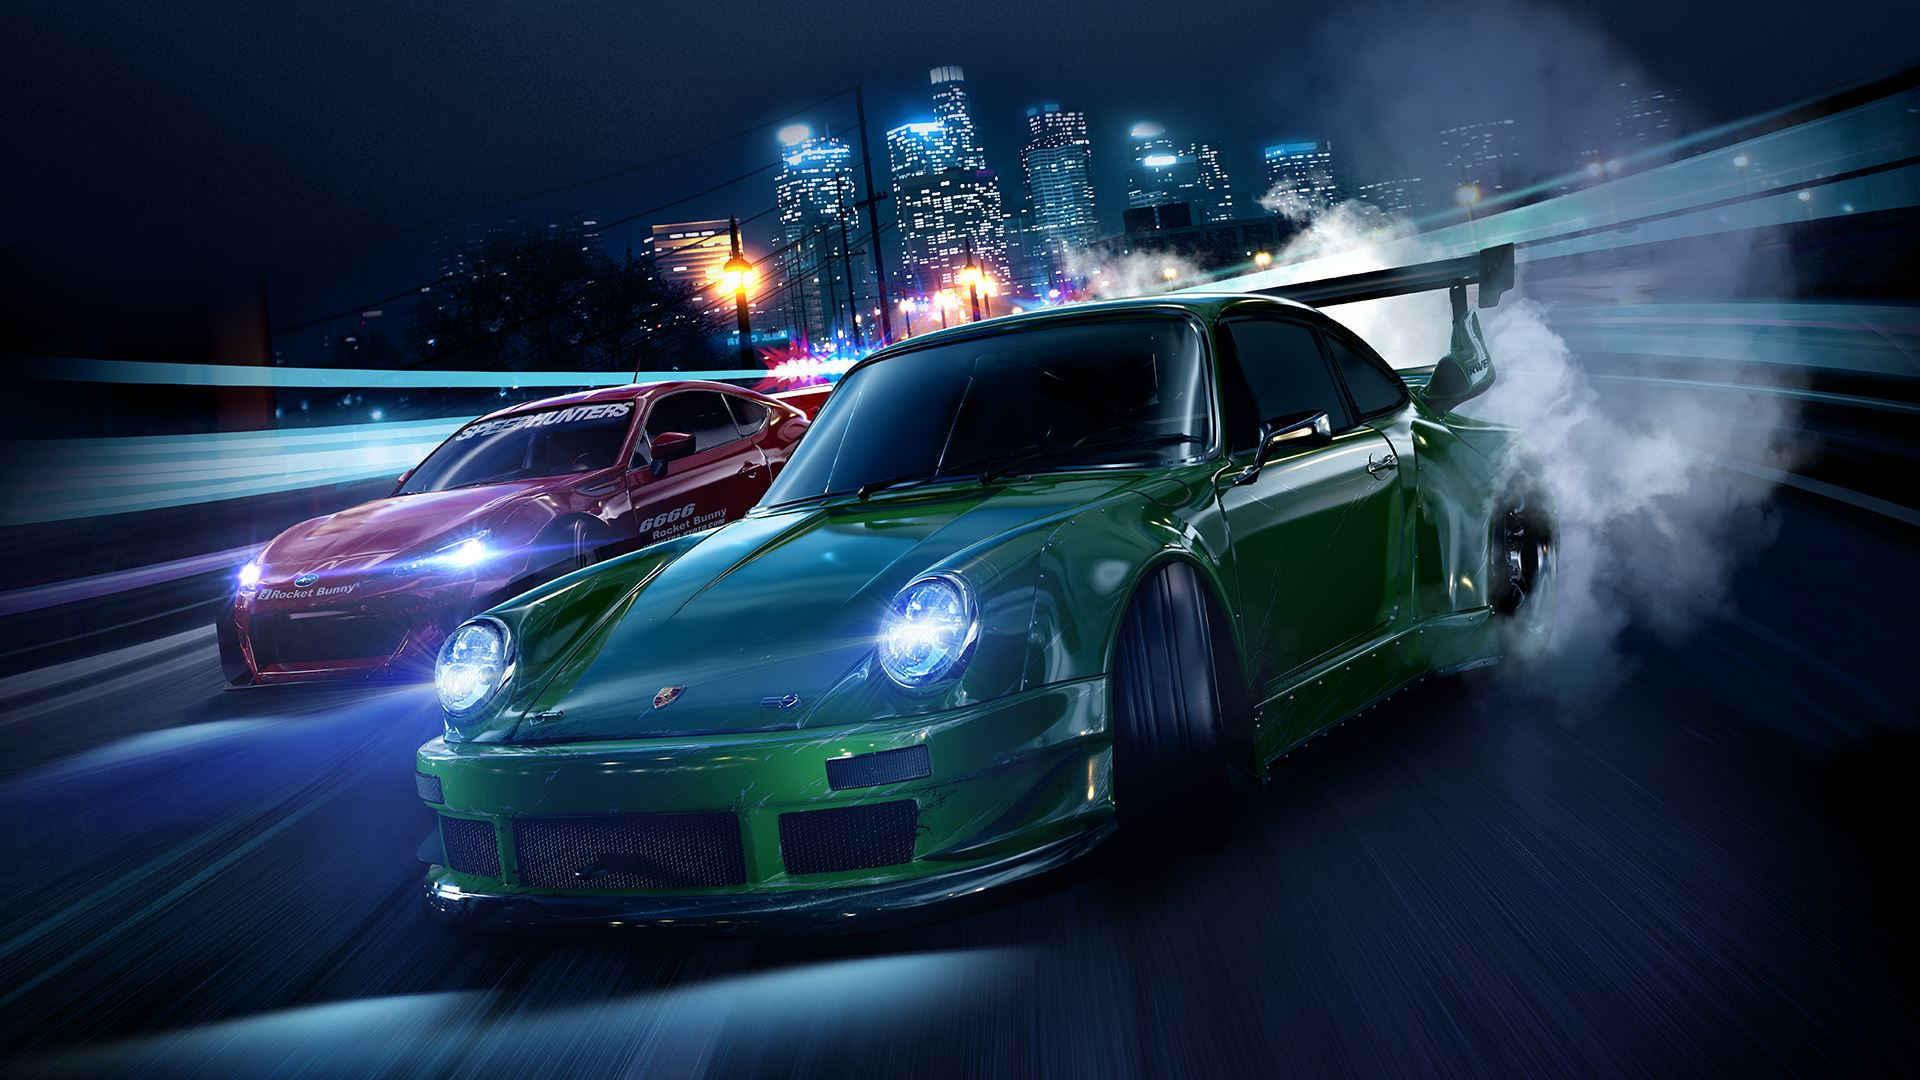 More information about "Nuovo Need for Speed entro Marzo 2018"